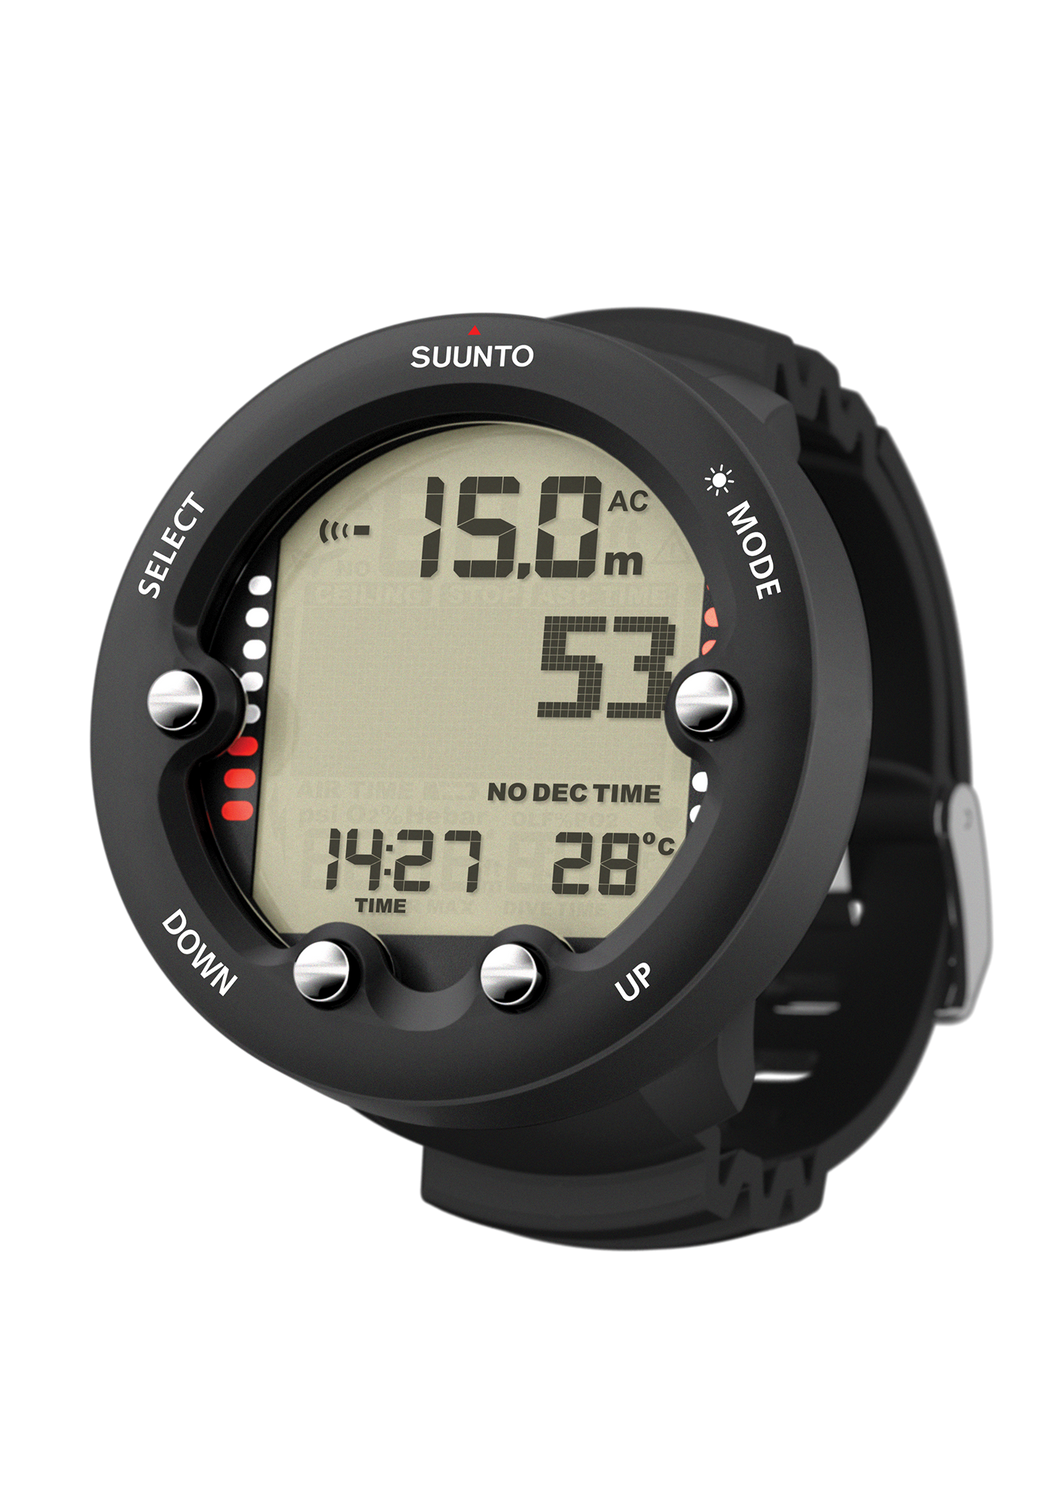 Suunto ZOOP NOVO - BLUE AND LIME IN STOCK